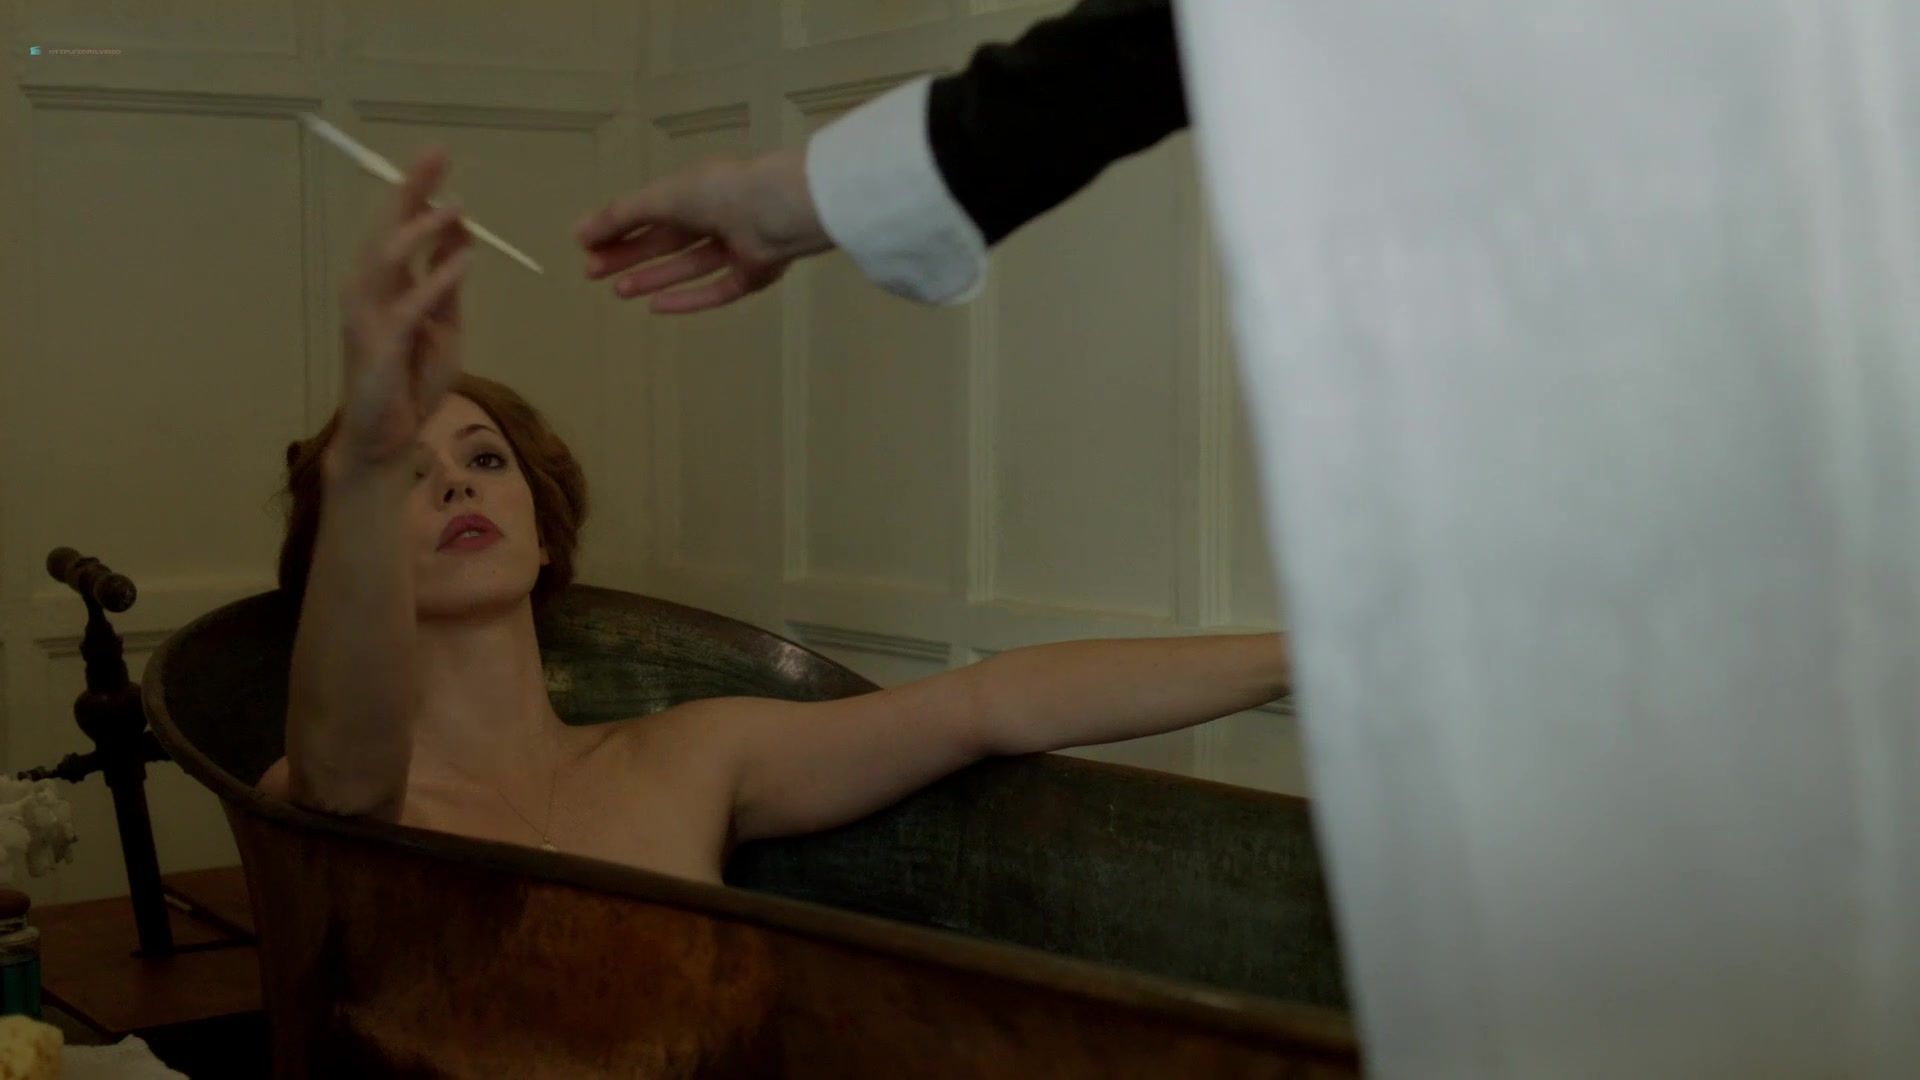 Excitemii Rebecca Hall, Adelaide Clemens naked - Parades End (2012) 18yo